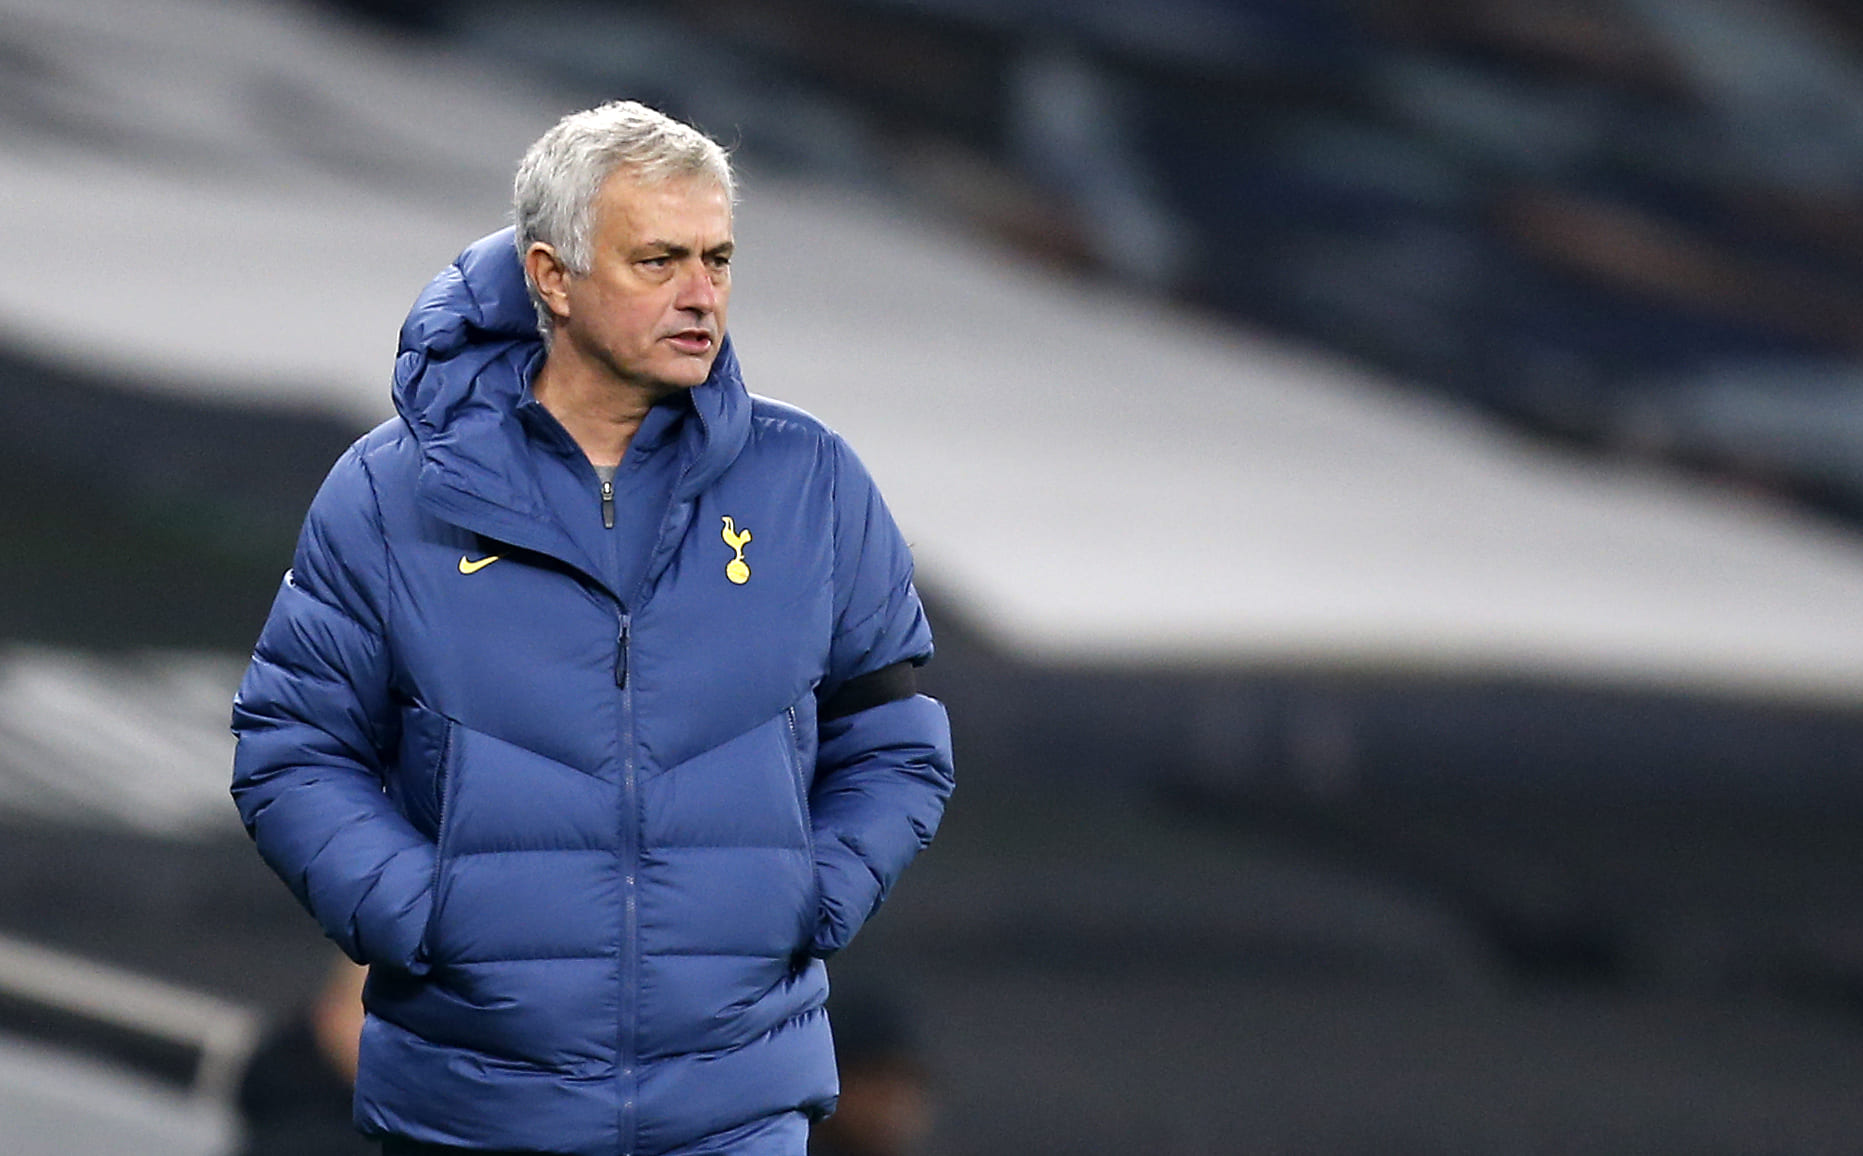 Jose Mourinho was left frustrated after Spurs lost to Liverpool in the 90th minute of the game. (GETTY Images)